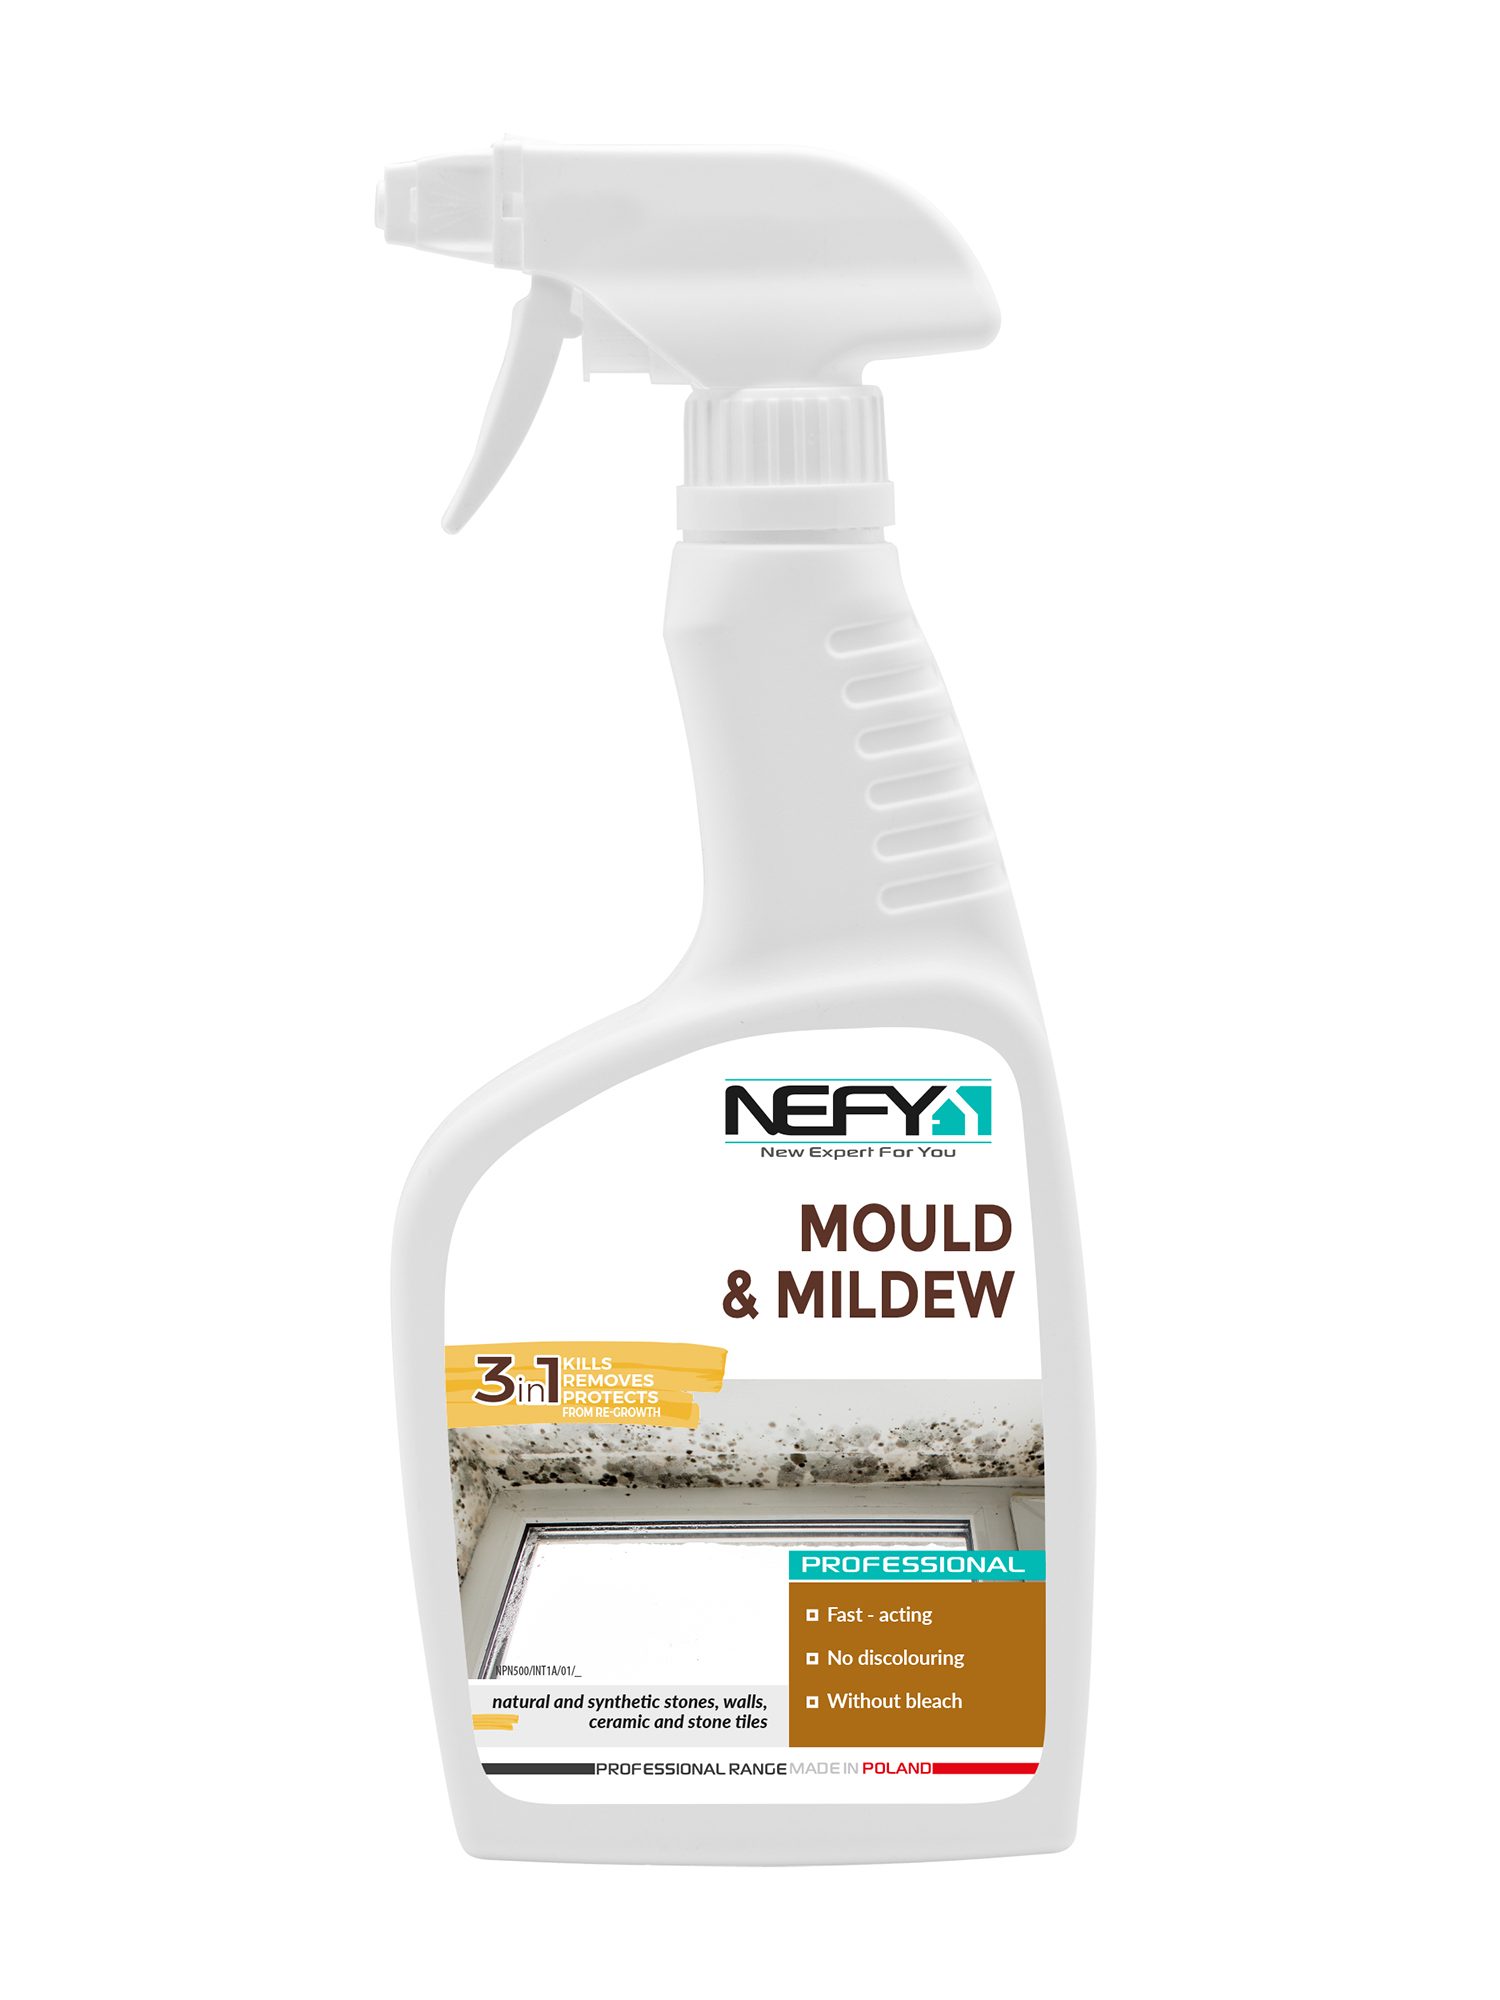 Mould remover